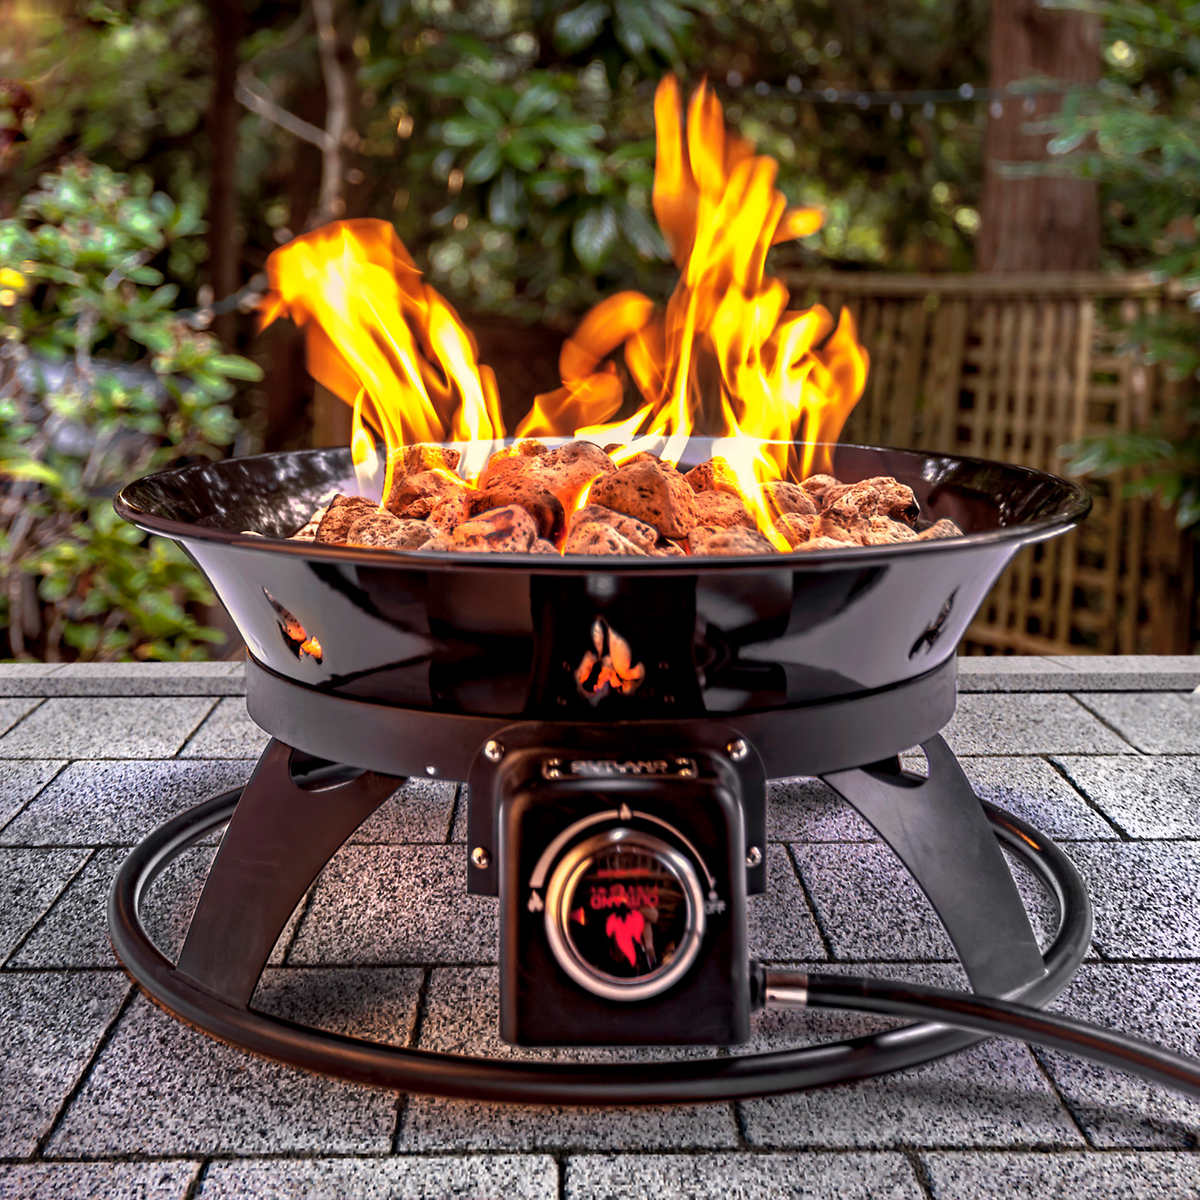 Outland Firebowl Outdoor Firepit Costco, Cooking Over Propane Fire Pit